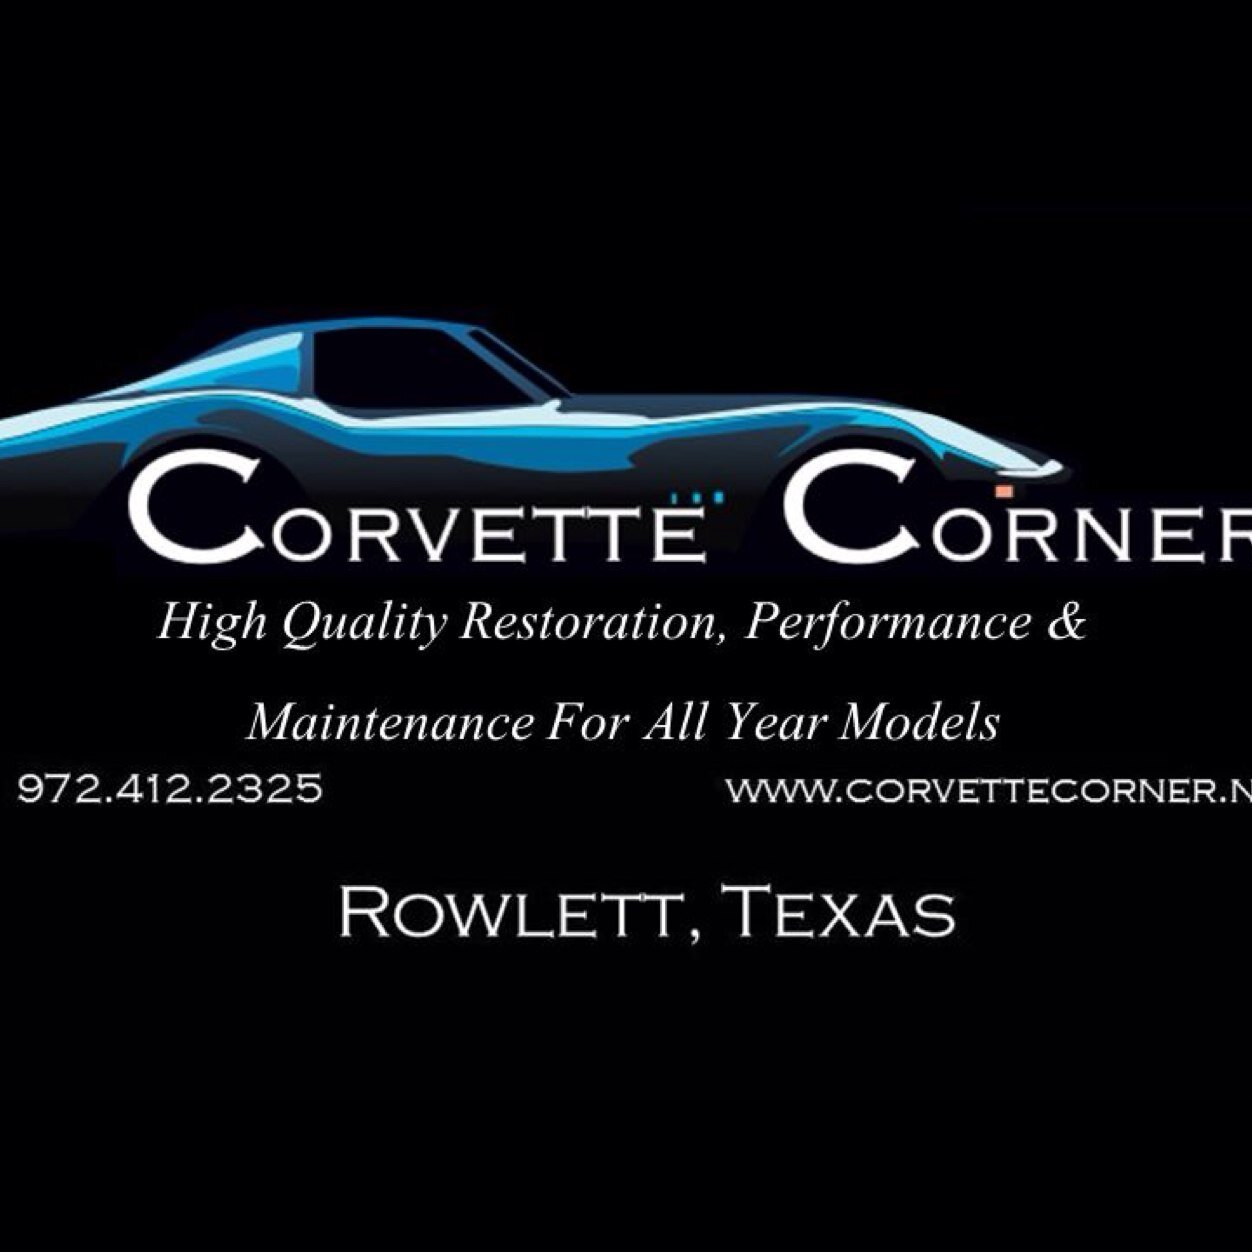 Corvette Shop in Dallas area Rowlett, TX. We work on all year model Corvettes, from restoration to tune ups to a/c repair, anything your corvette needs!